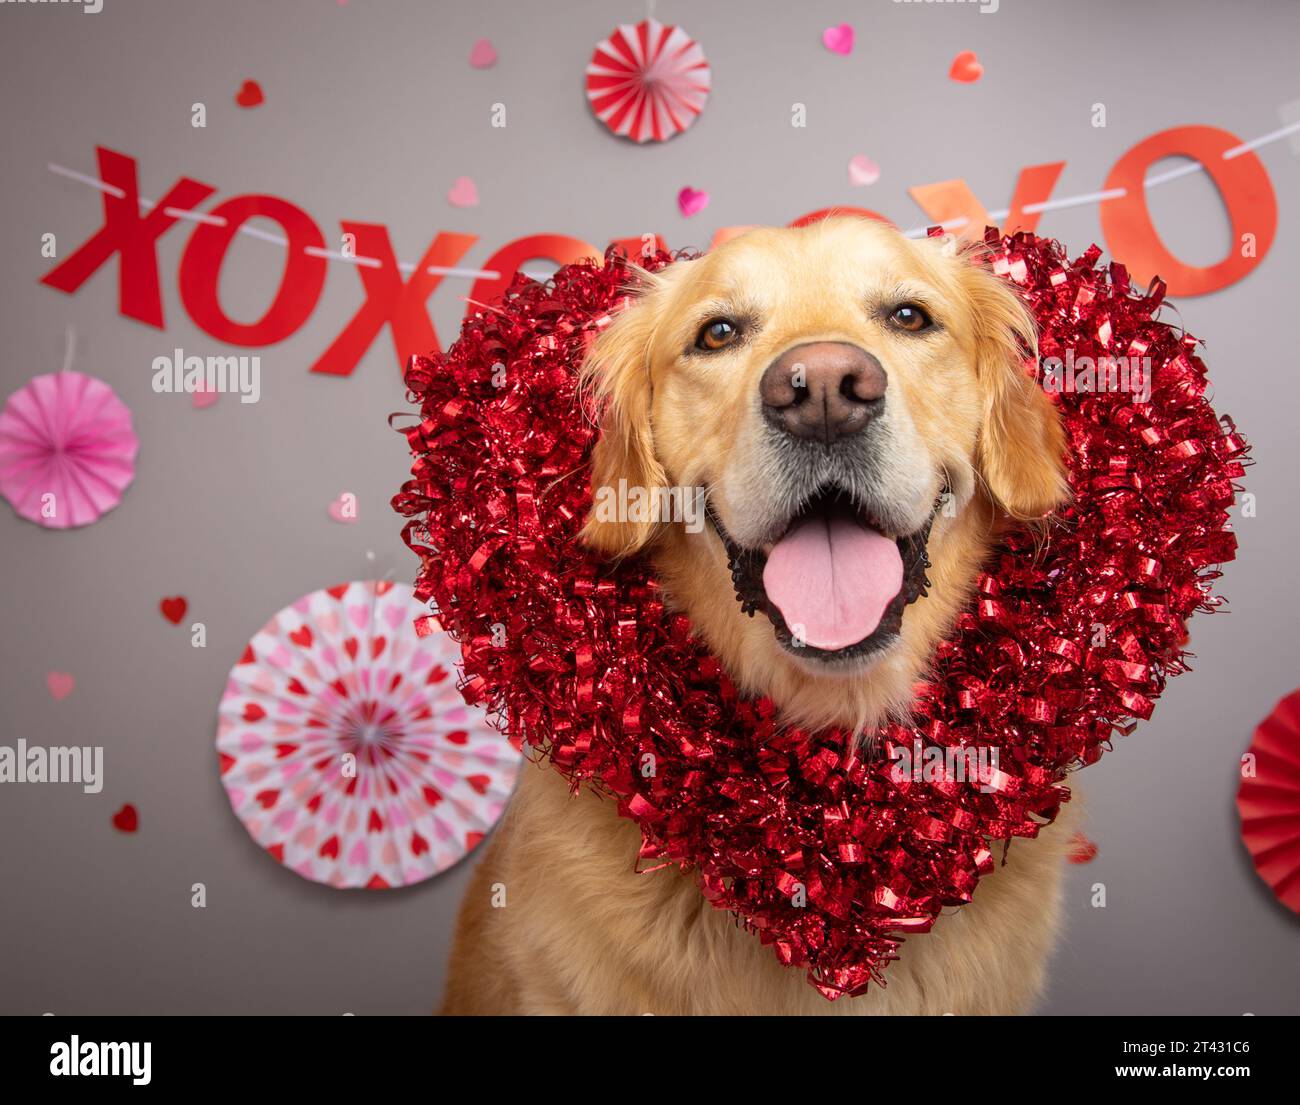 Portrait of a golden retriever sitting in front of a festive banner Stock Photo